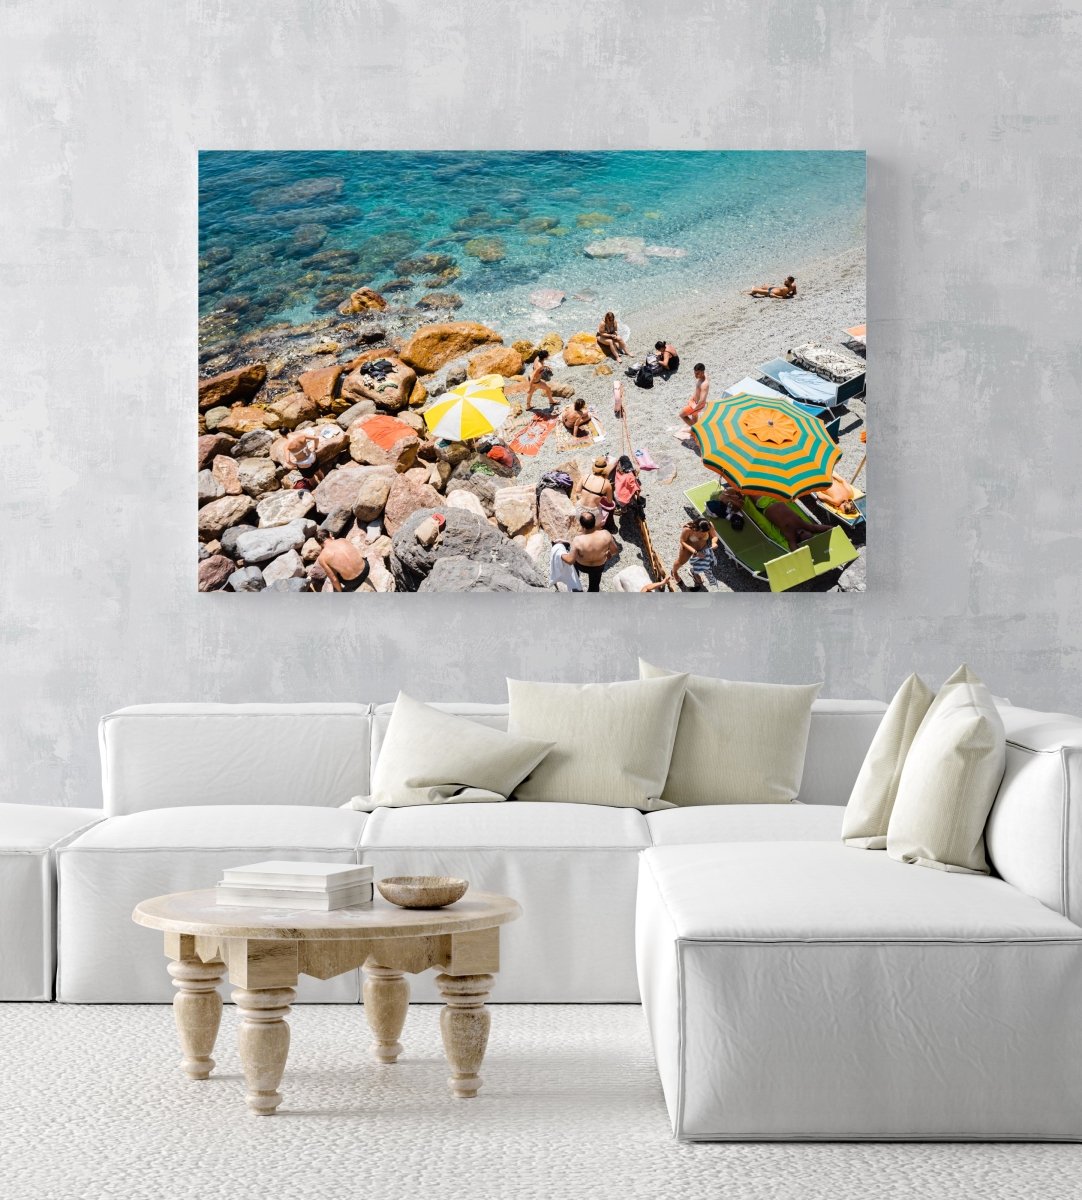 Umbrellas and people on beach with rocks and sand in Cinque Terre in an acrylic/perspex frame